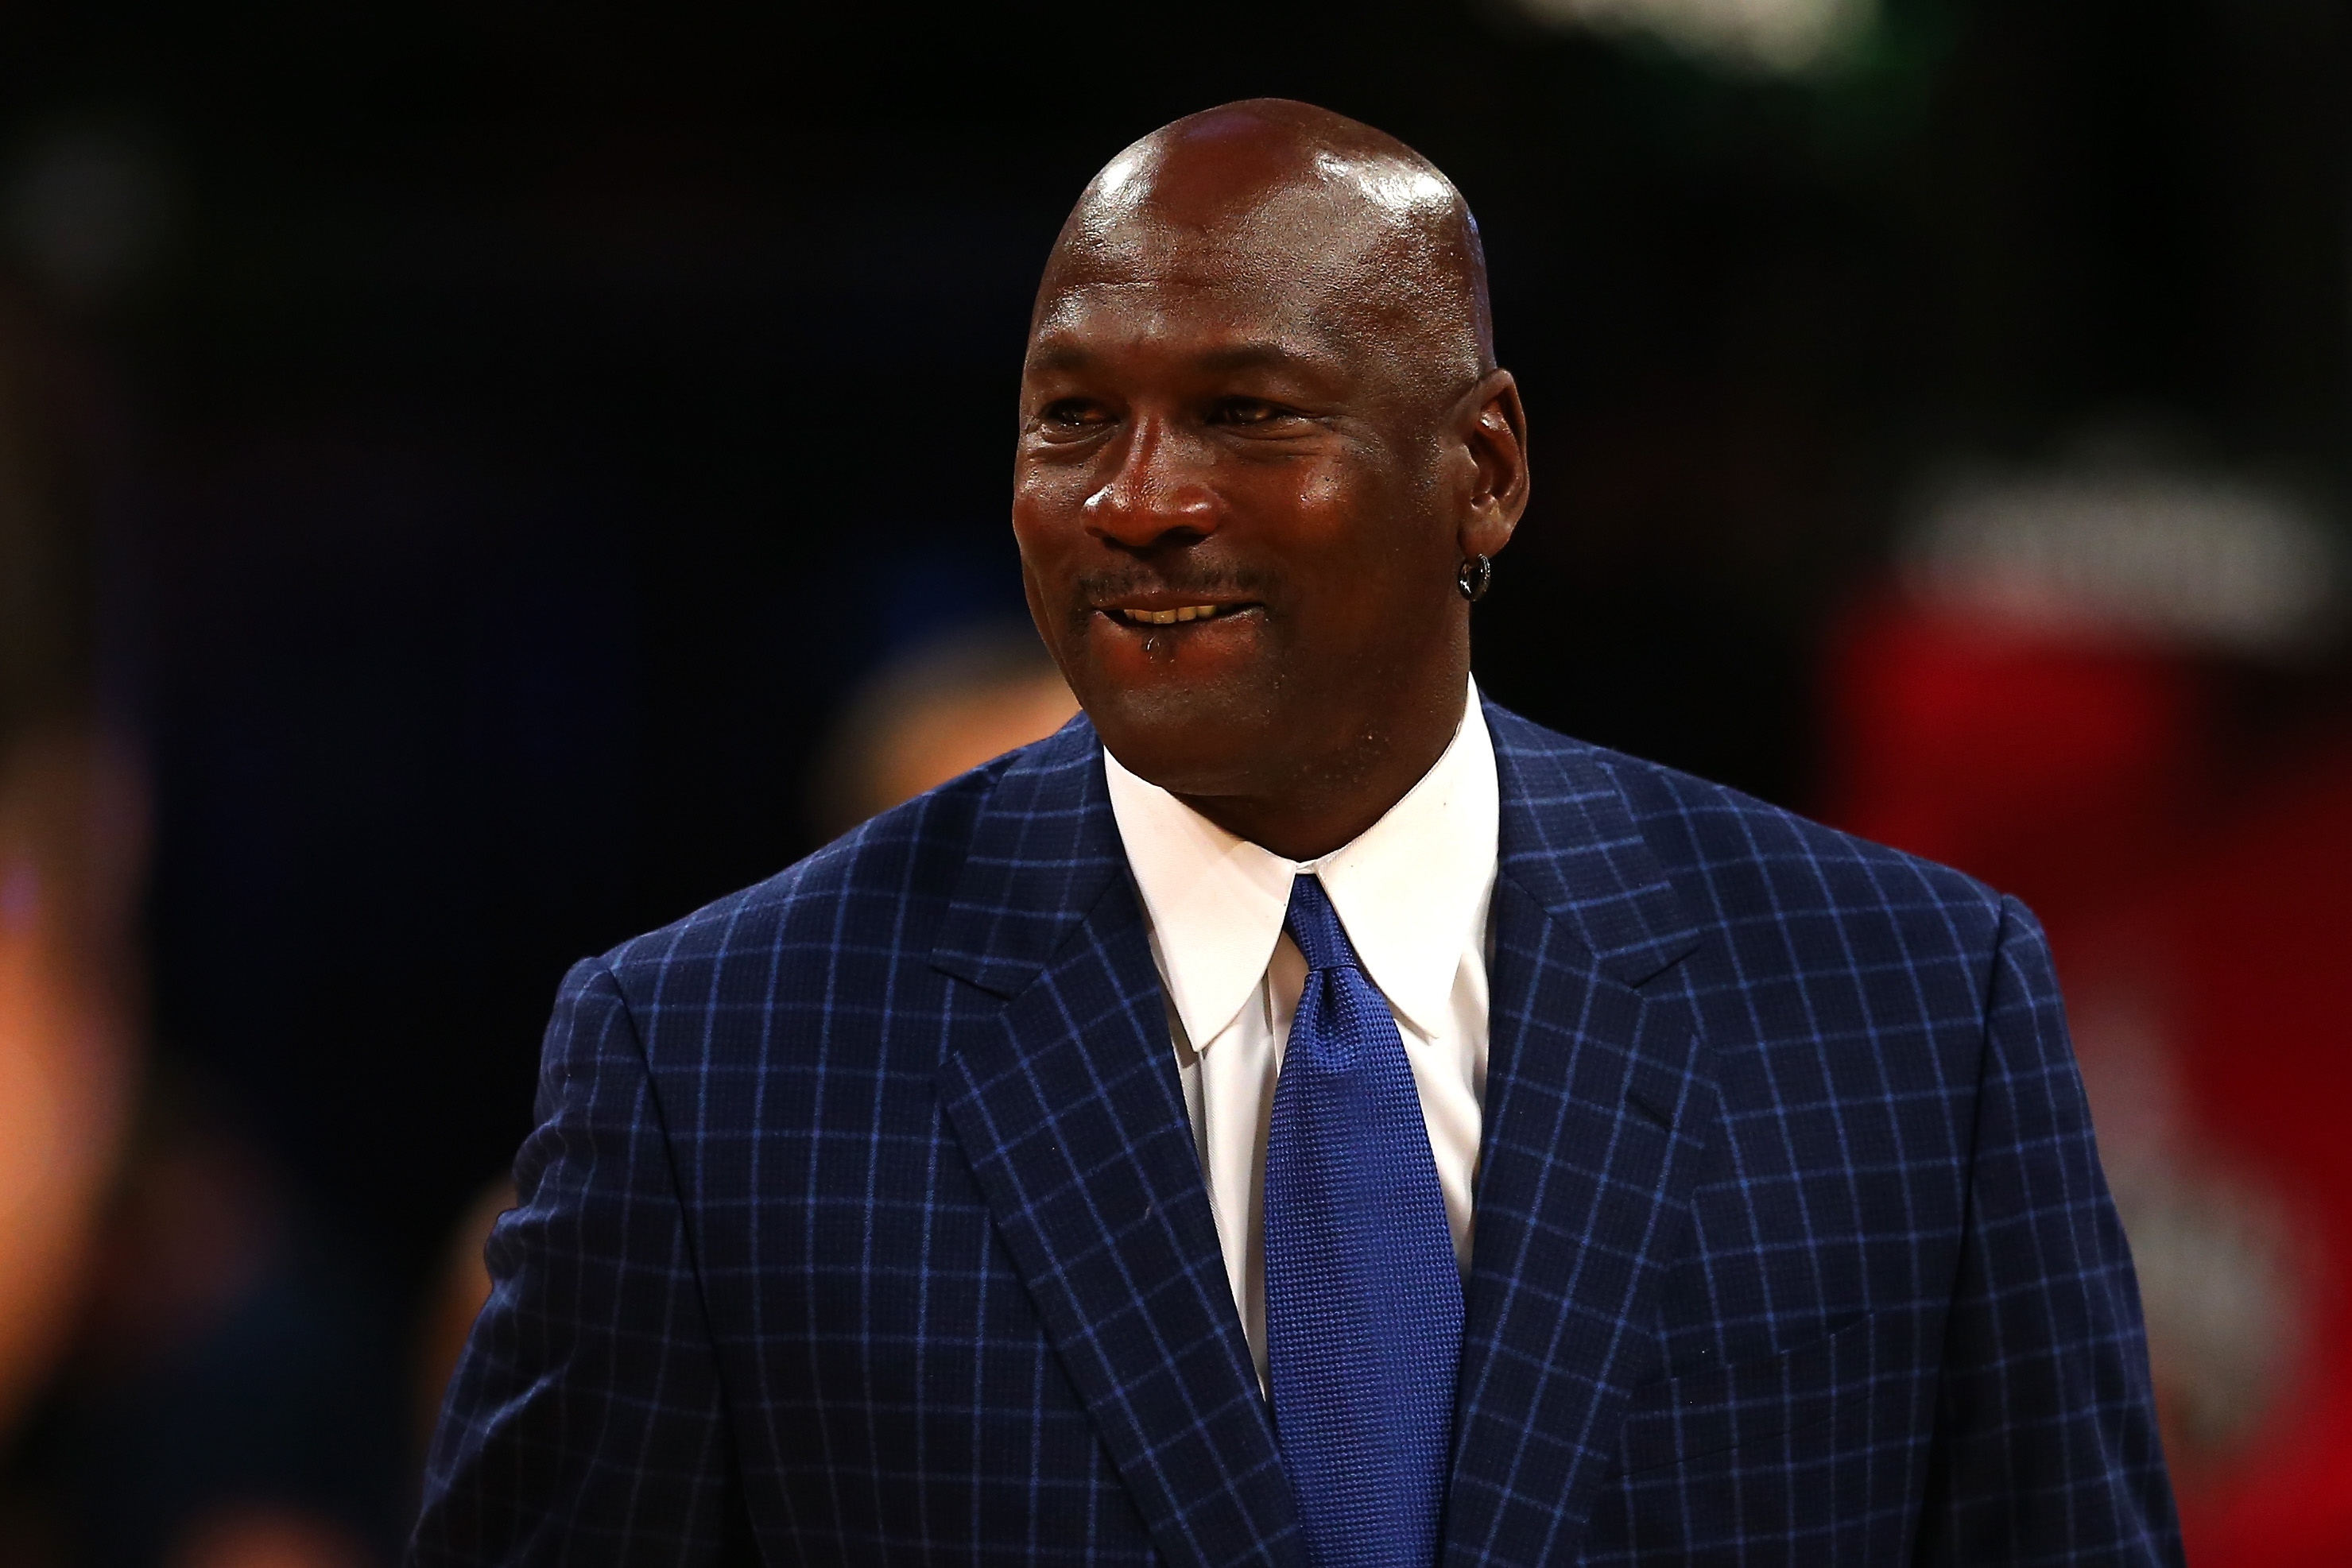 Michael Jordan Net Worth 5 Fast Facts You Need to Know